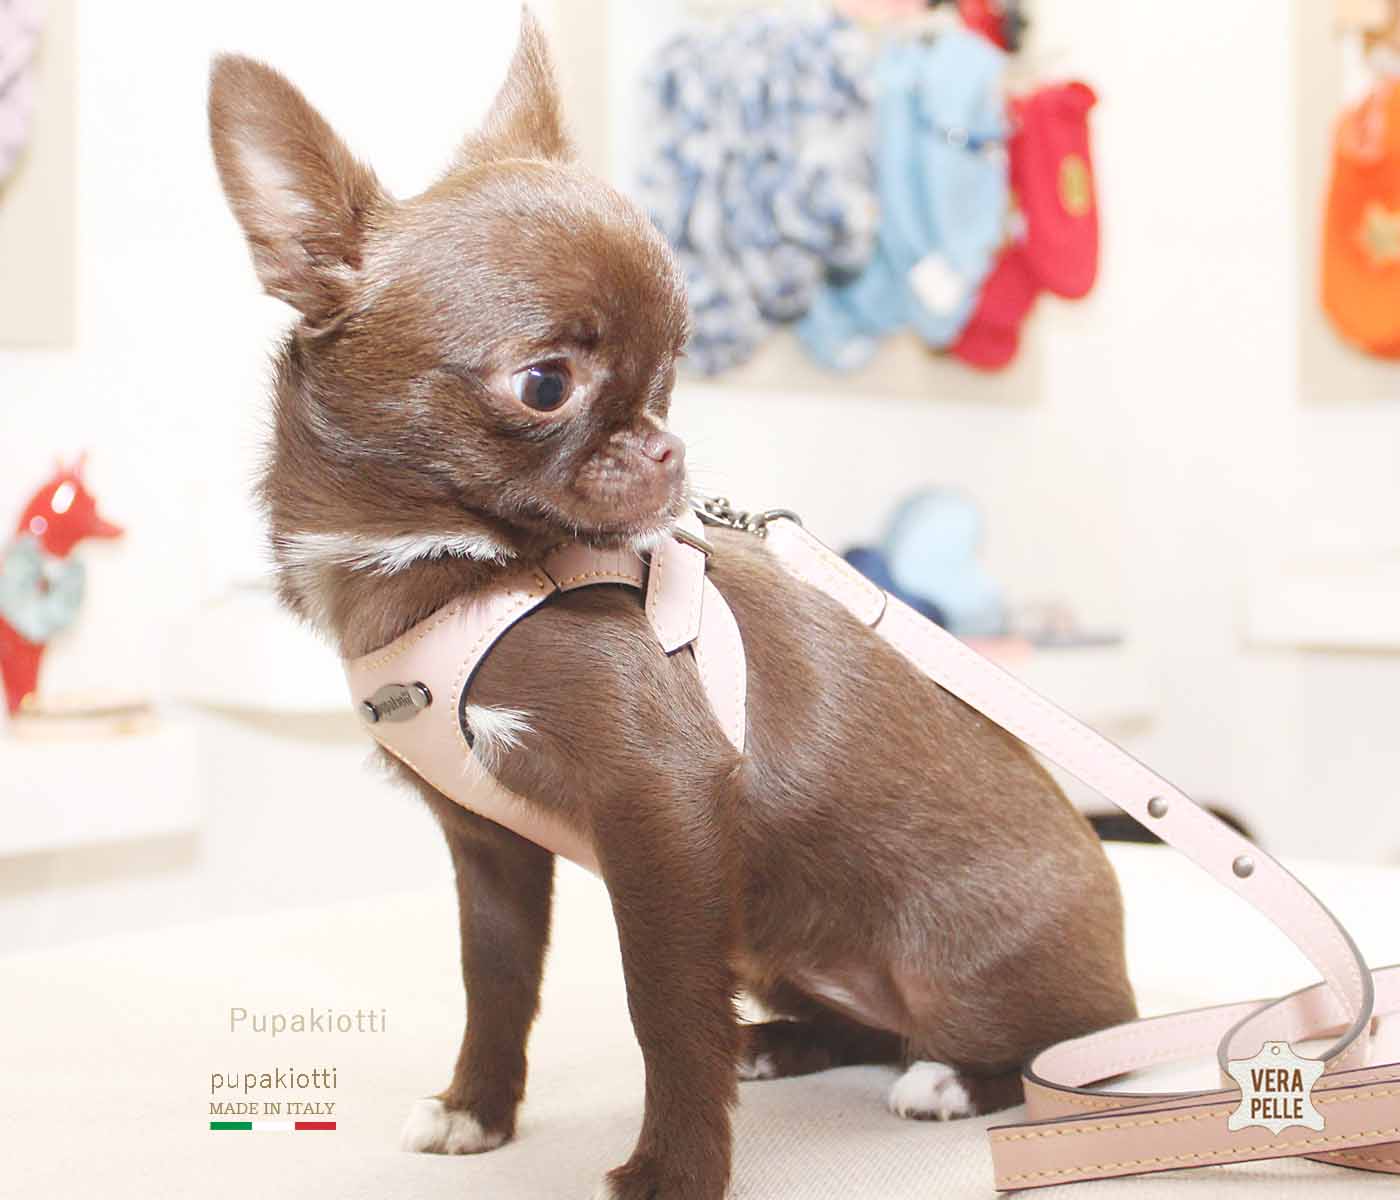 PREMIUM. Leather harness for dog